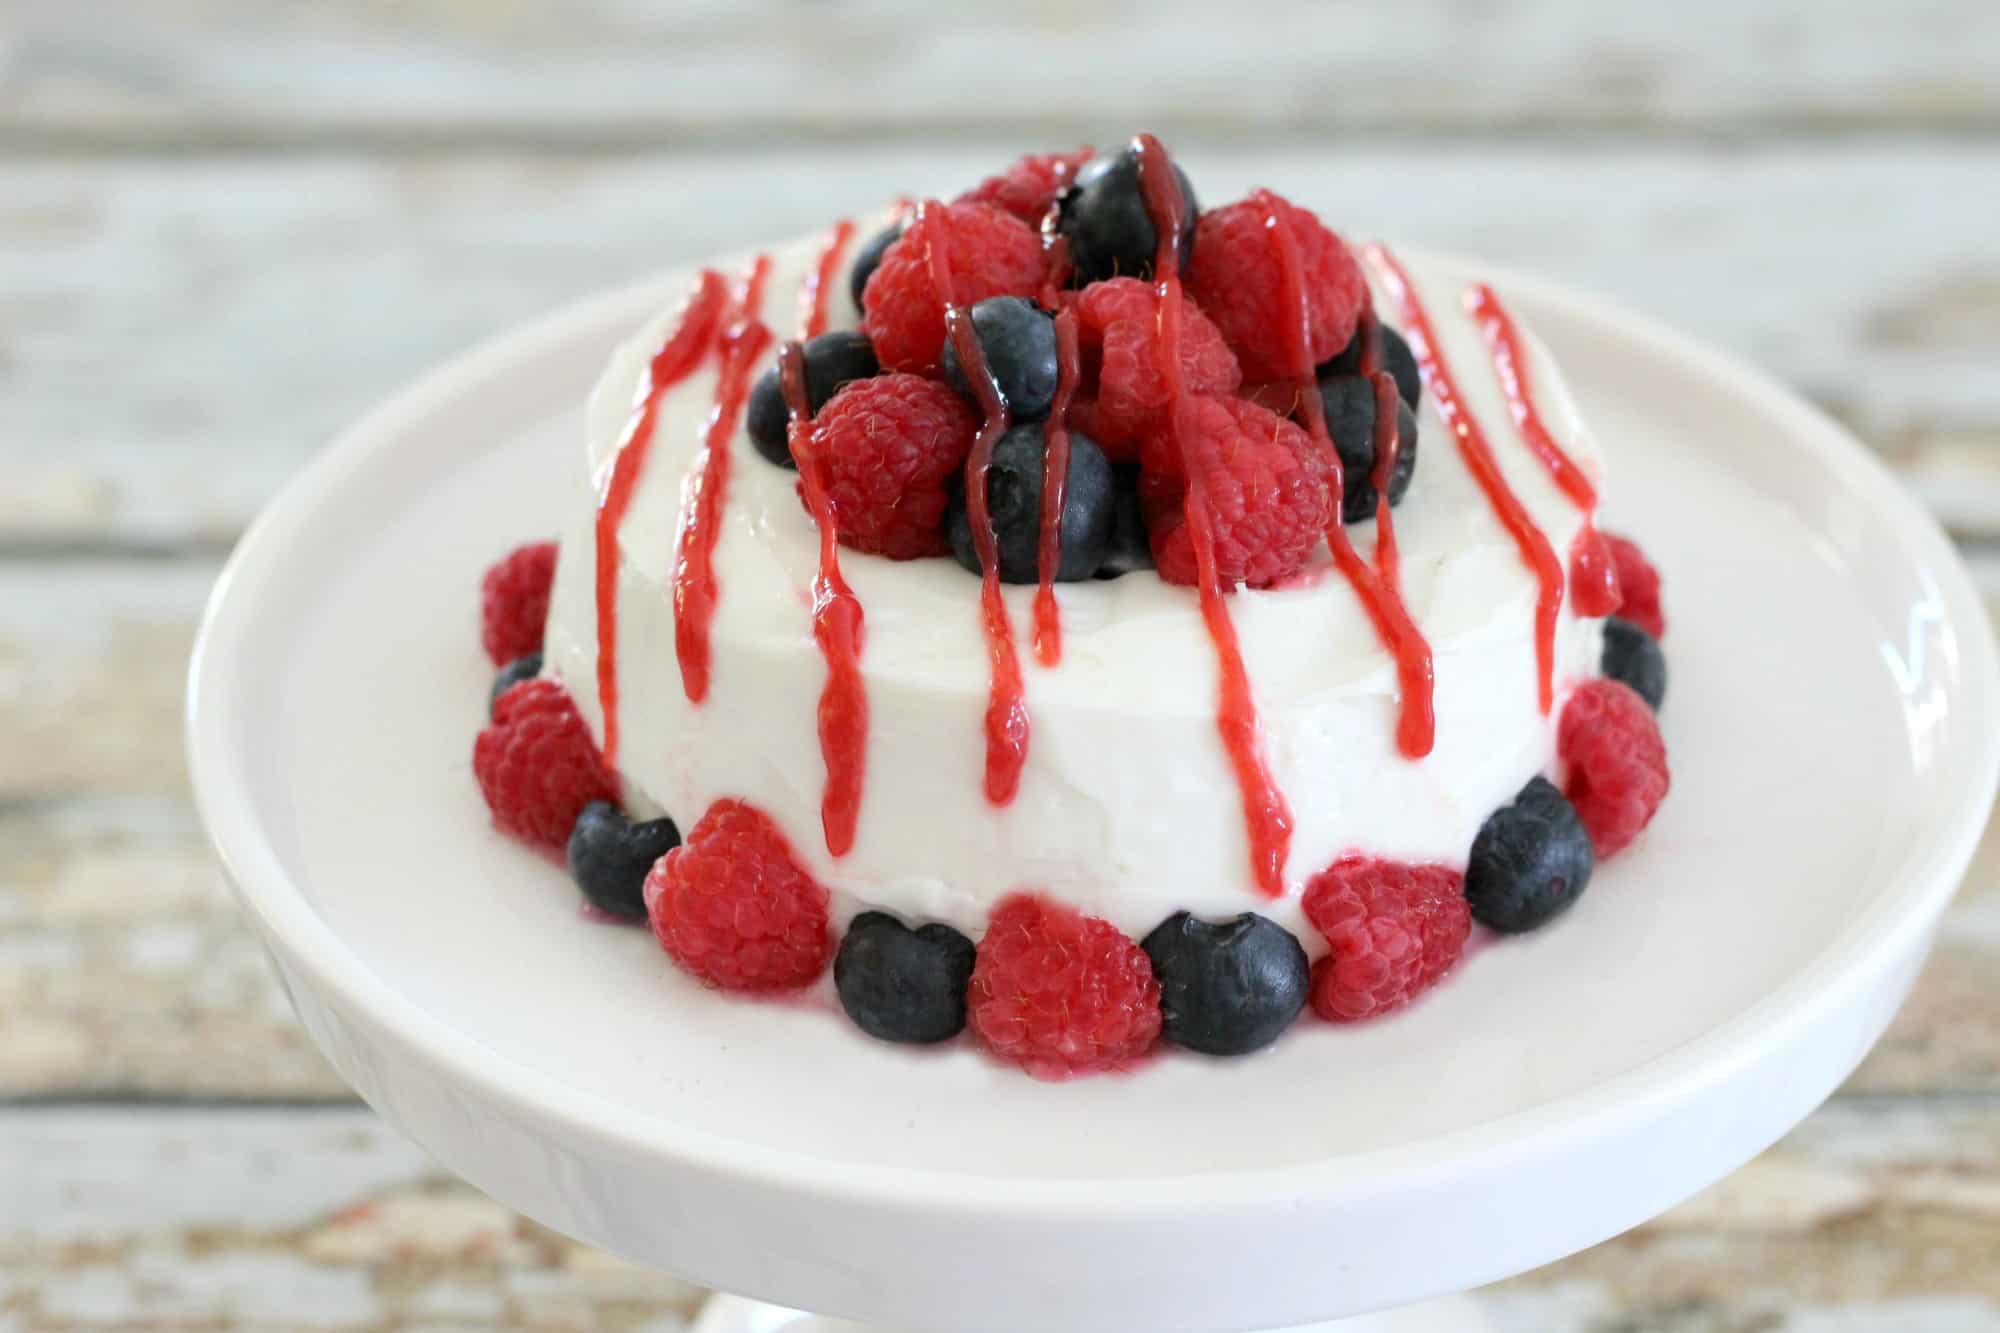 This berry cake is even better when drizzled with fresh raspberry puree